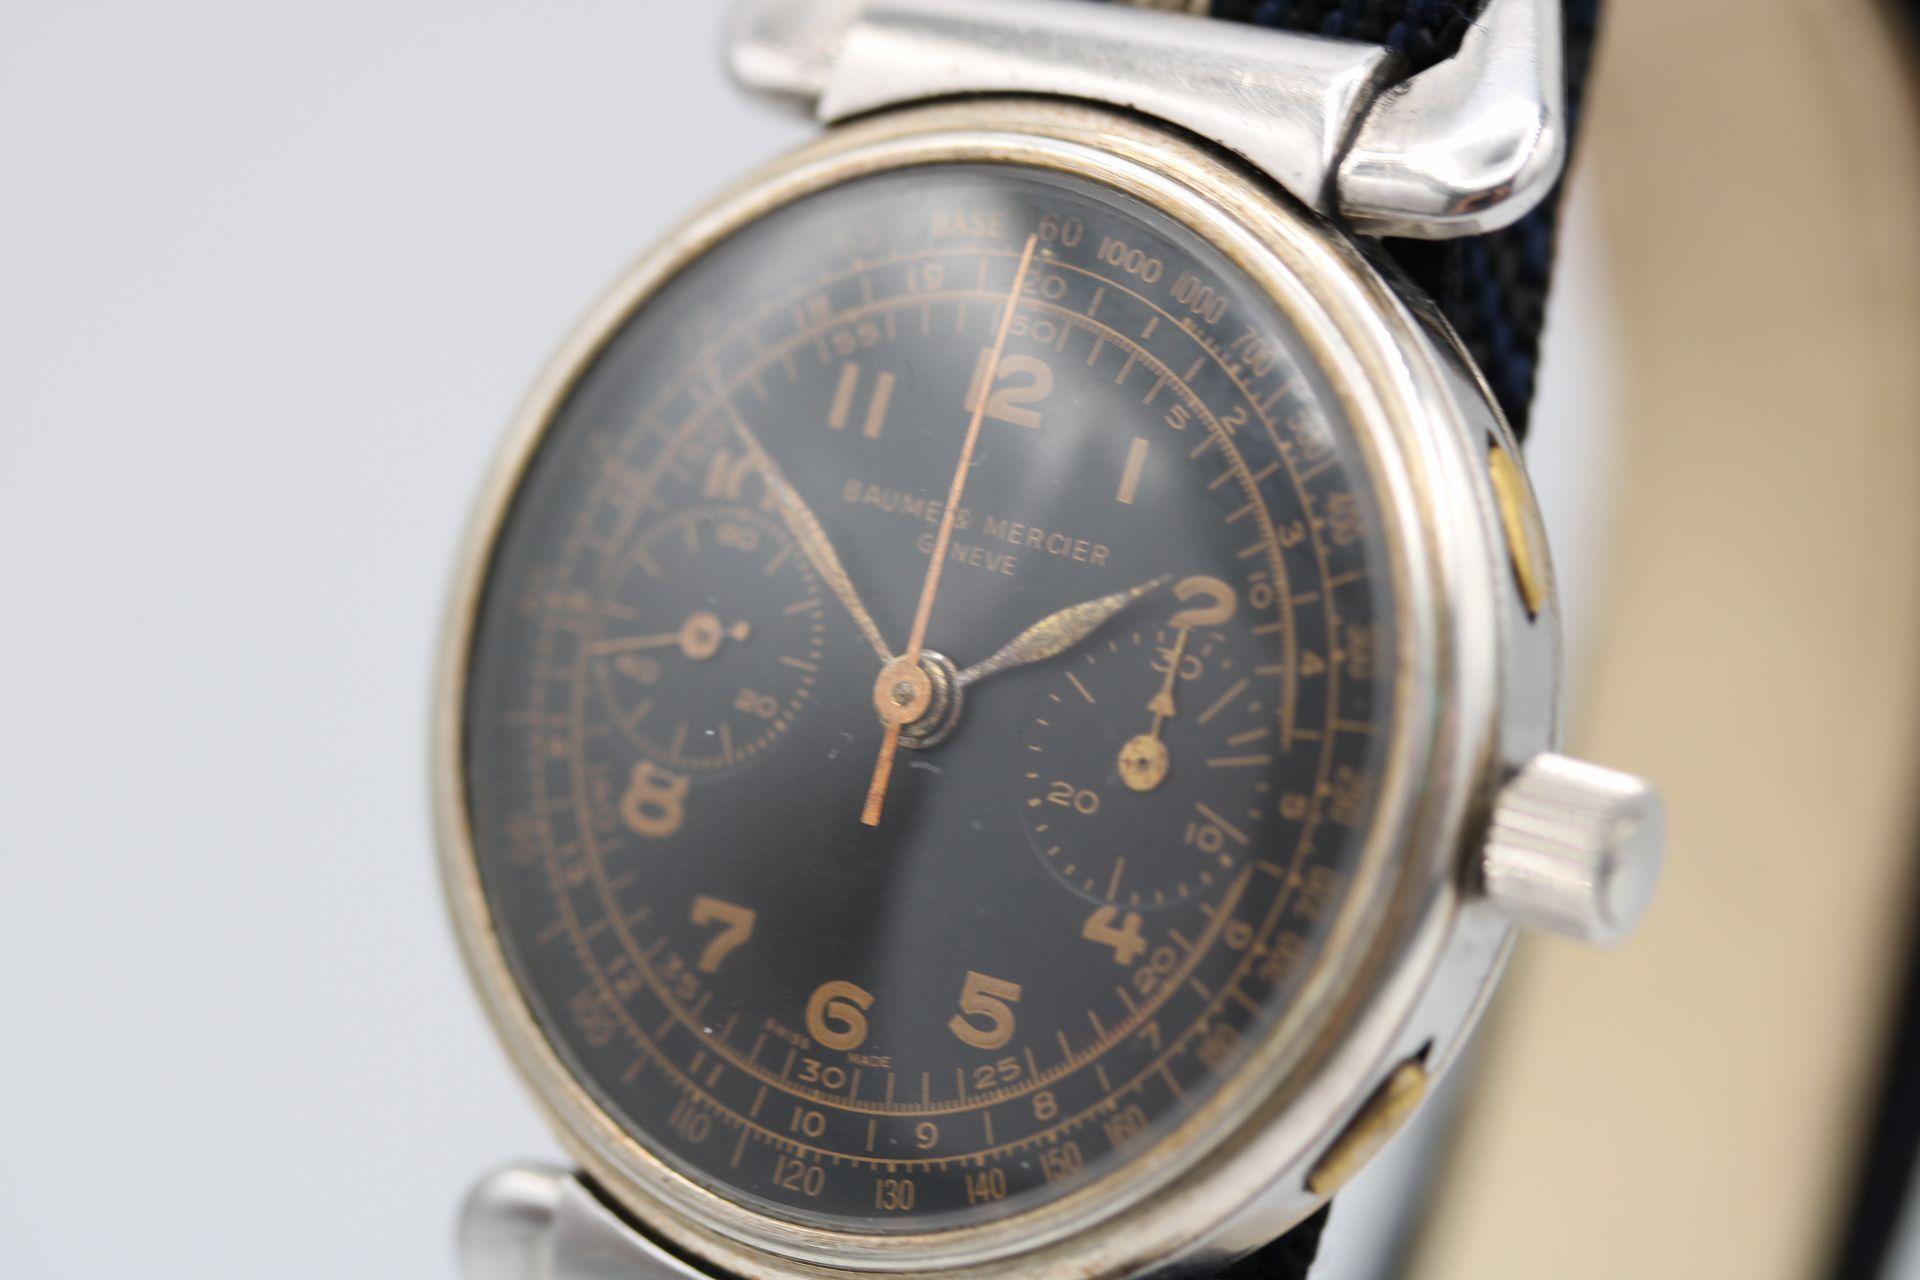 Watch: Baume and Mercier Bull Horn Chronograph
Stock Number: CHW5041
Price: £1600.00

A truly remarkable Chronograph from the early 1930's that is phenomenal condition and working order for a watch of nearly 100 years old!

There's more to this